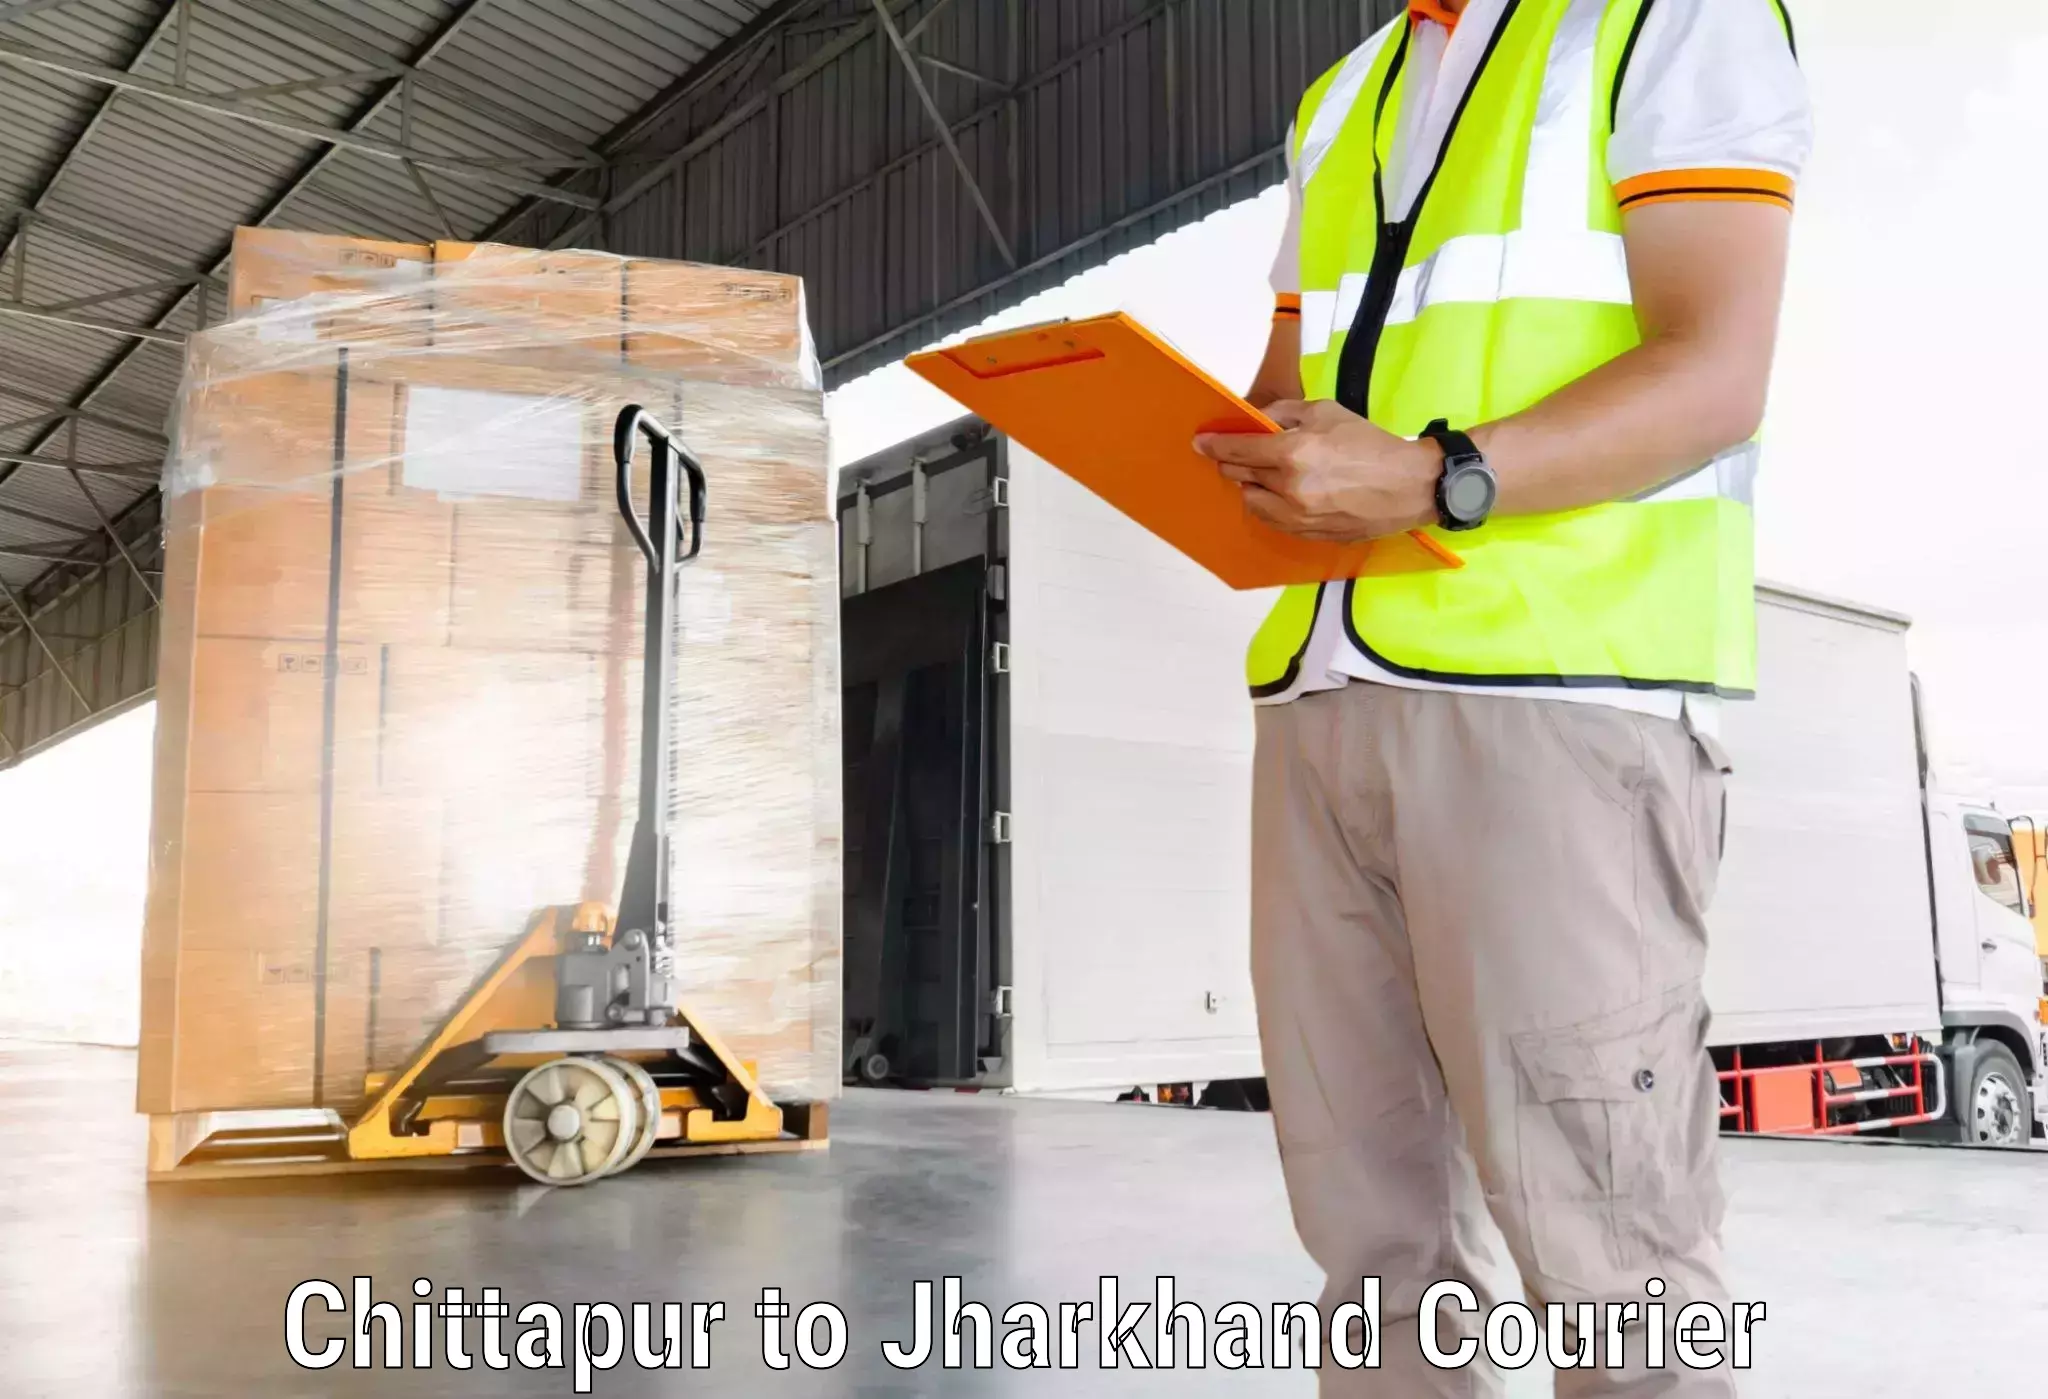 Courier service partnerships Chittapur to Bagodar